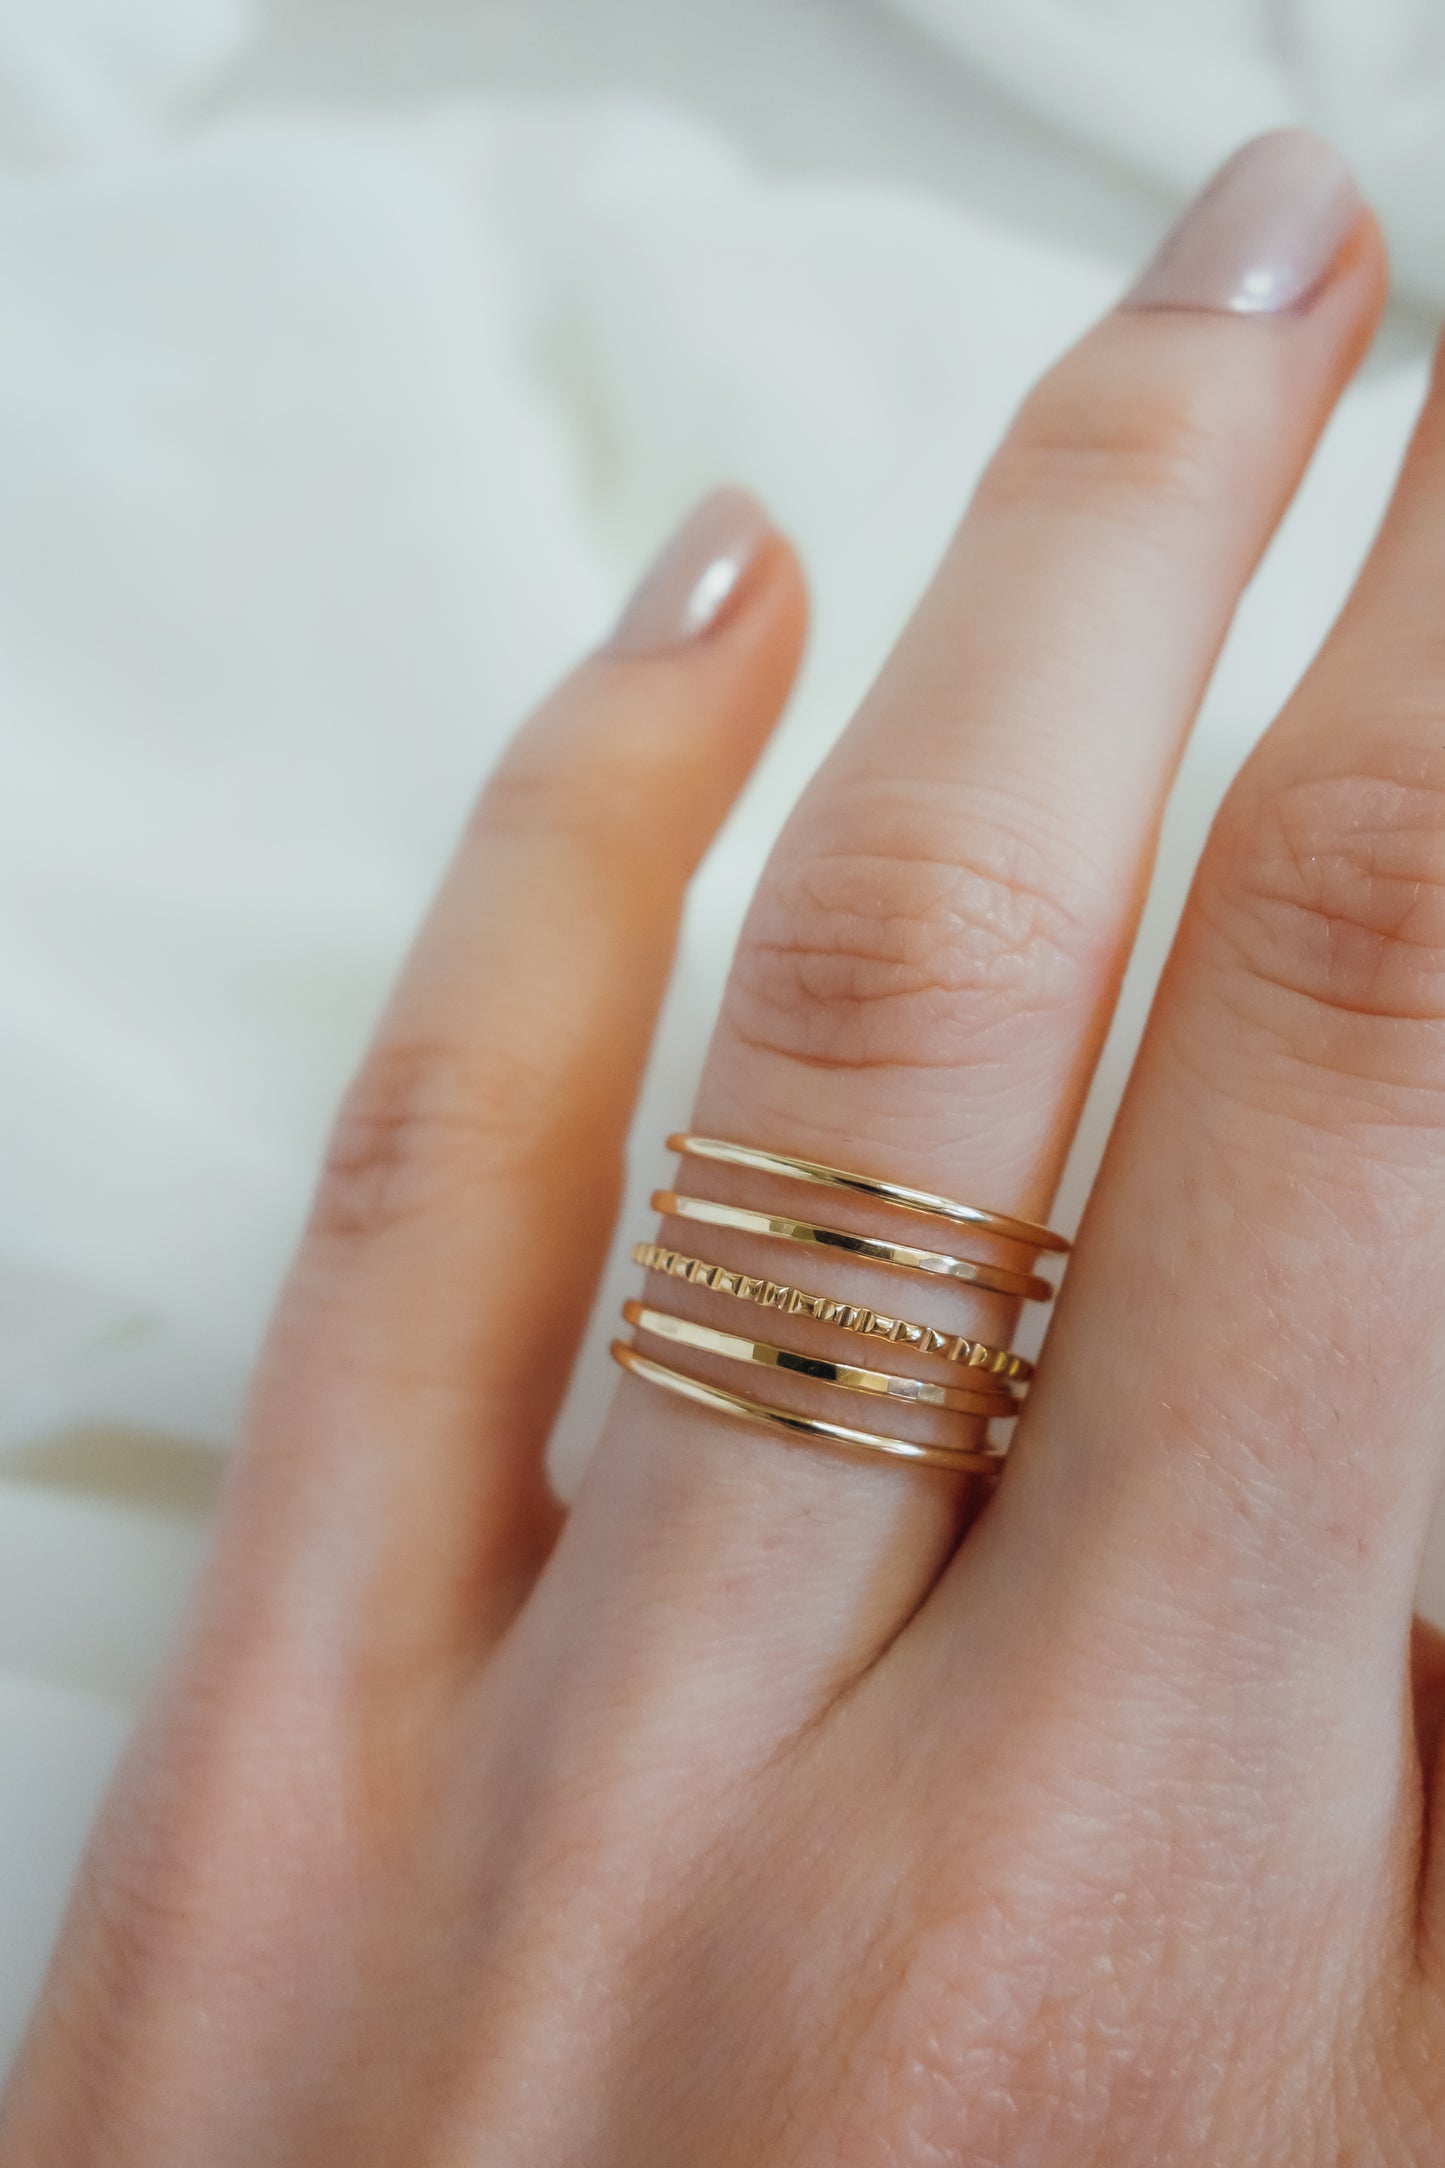 Lined Ring, Solid 14K Gold